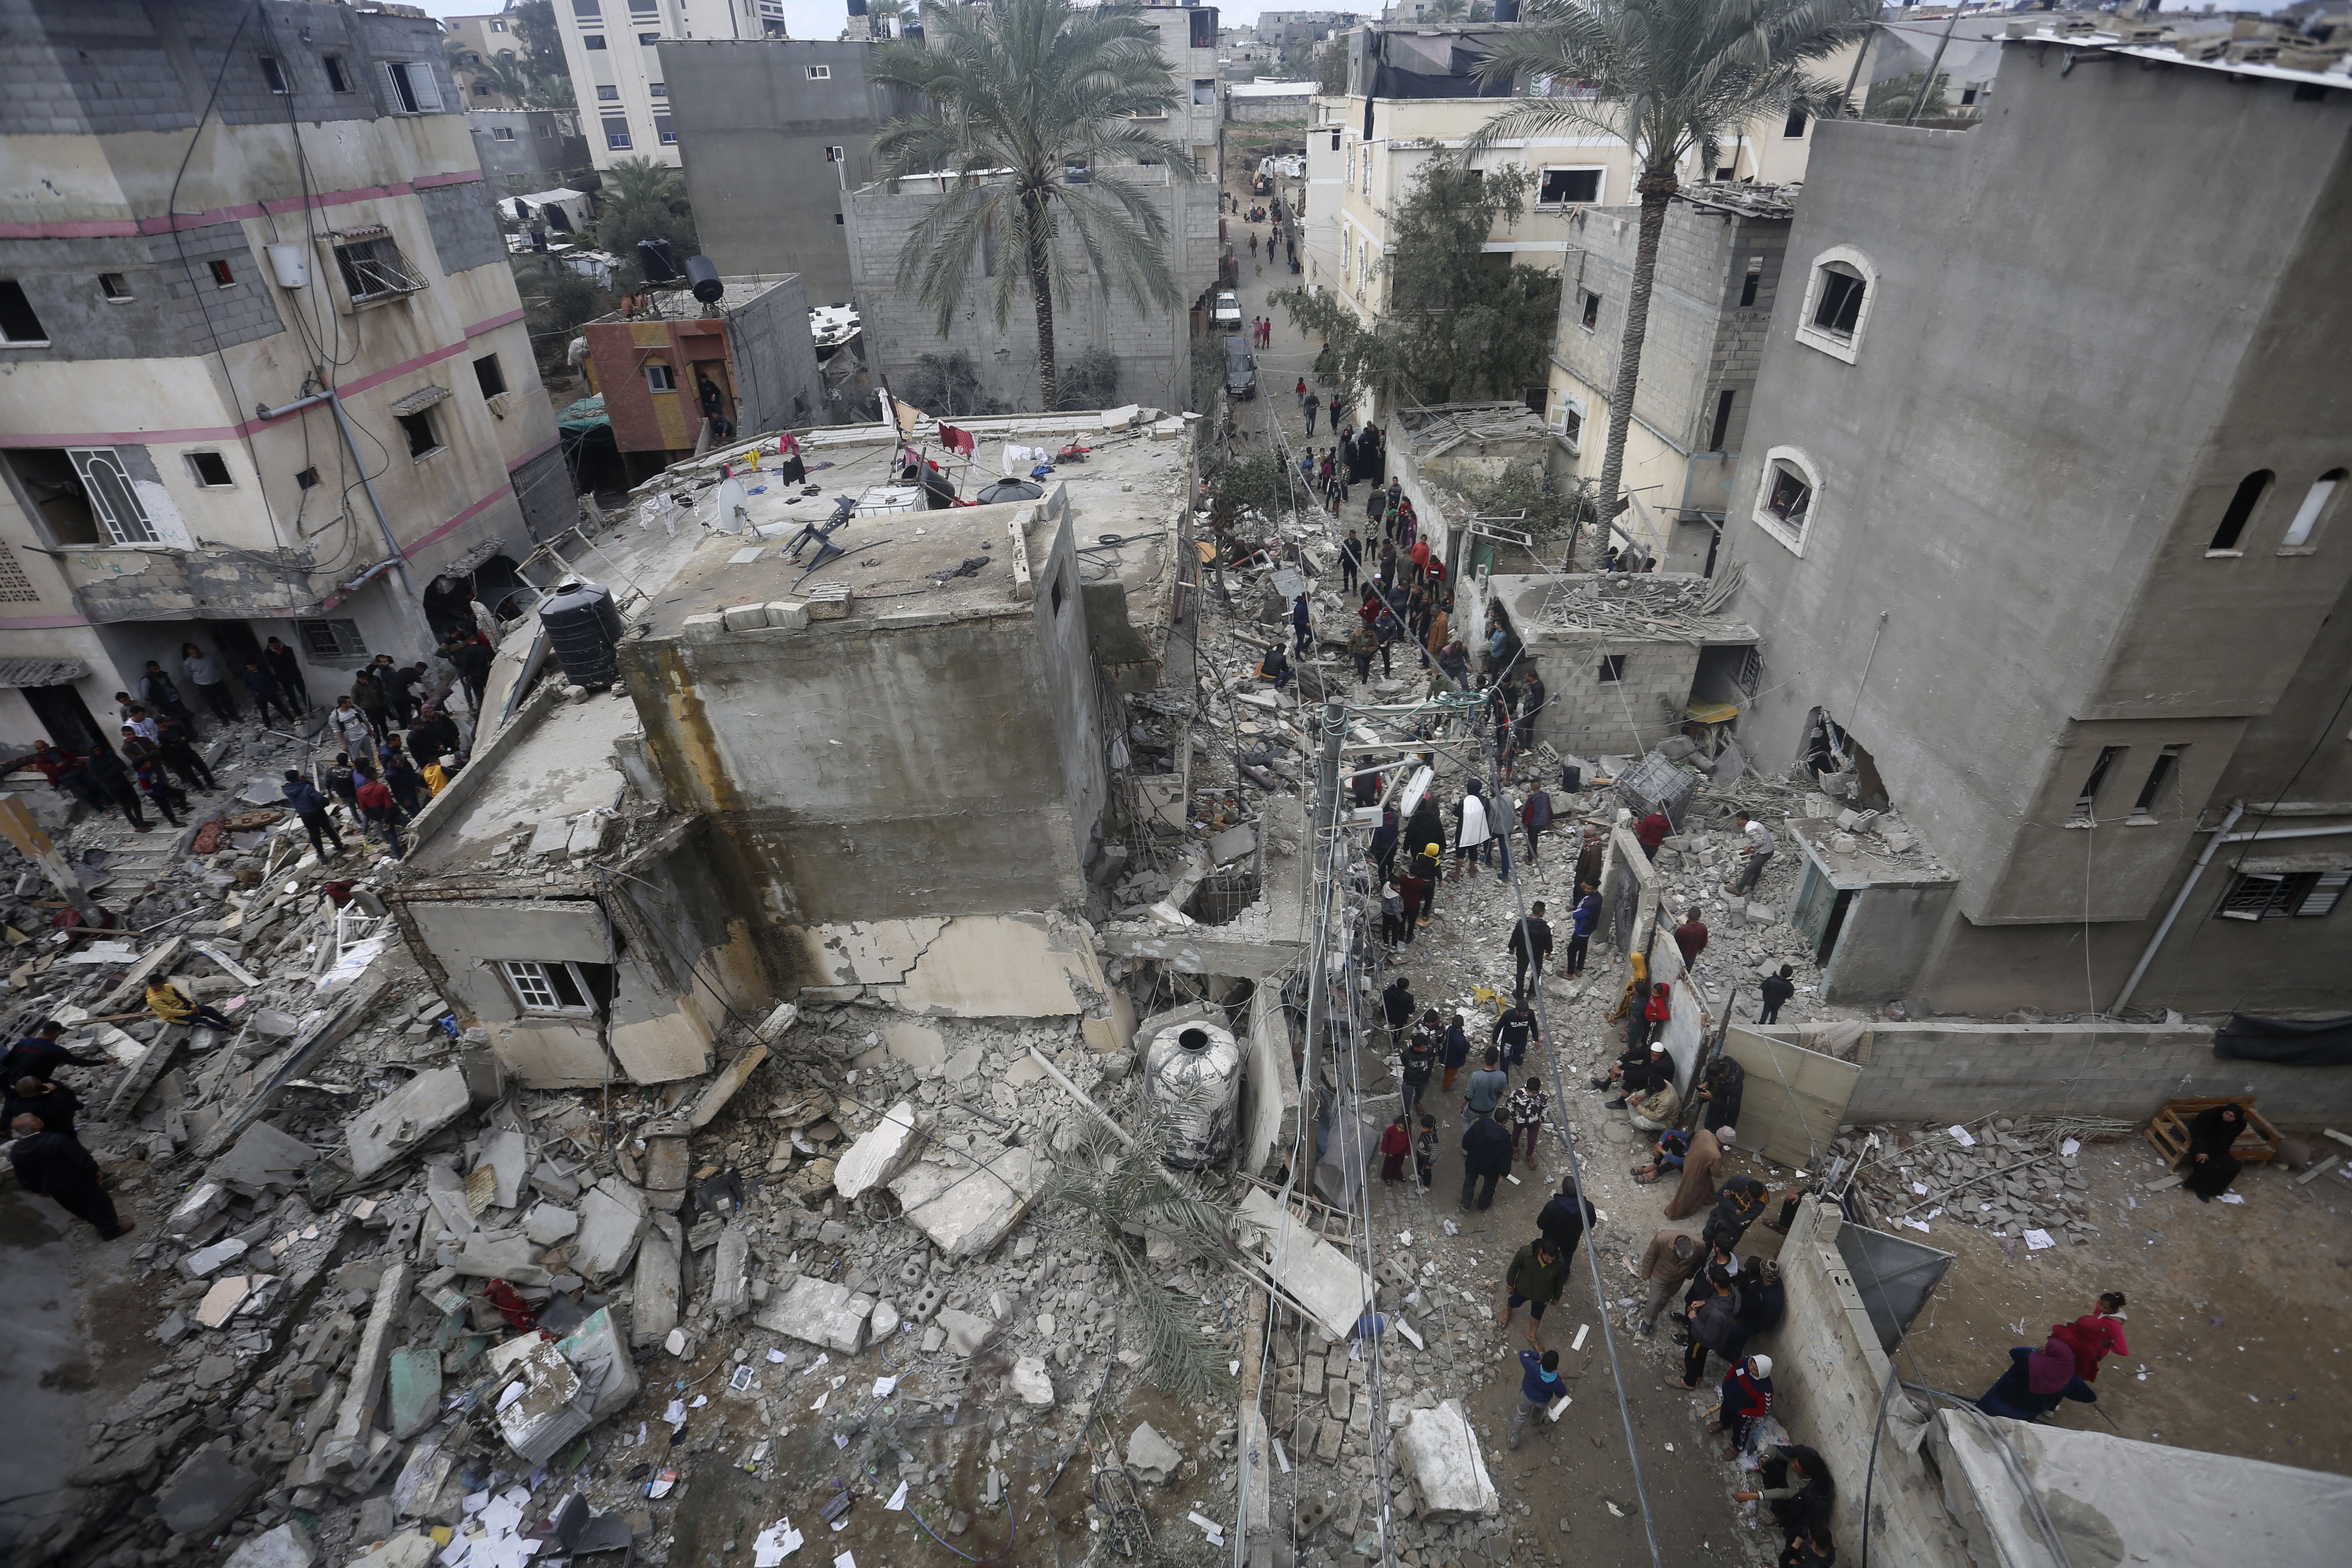 People search for victims in the rubble of the Baraka family home in Deir al-Balah, Gaza, after an Israeli airstrike on February 18.